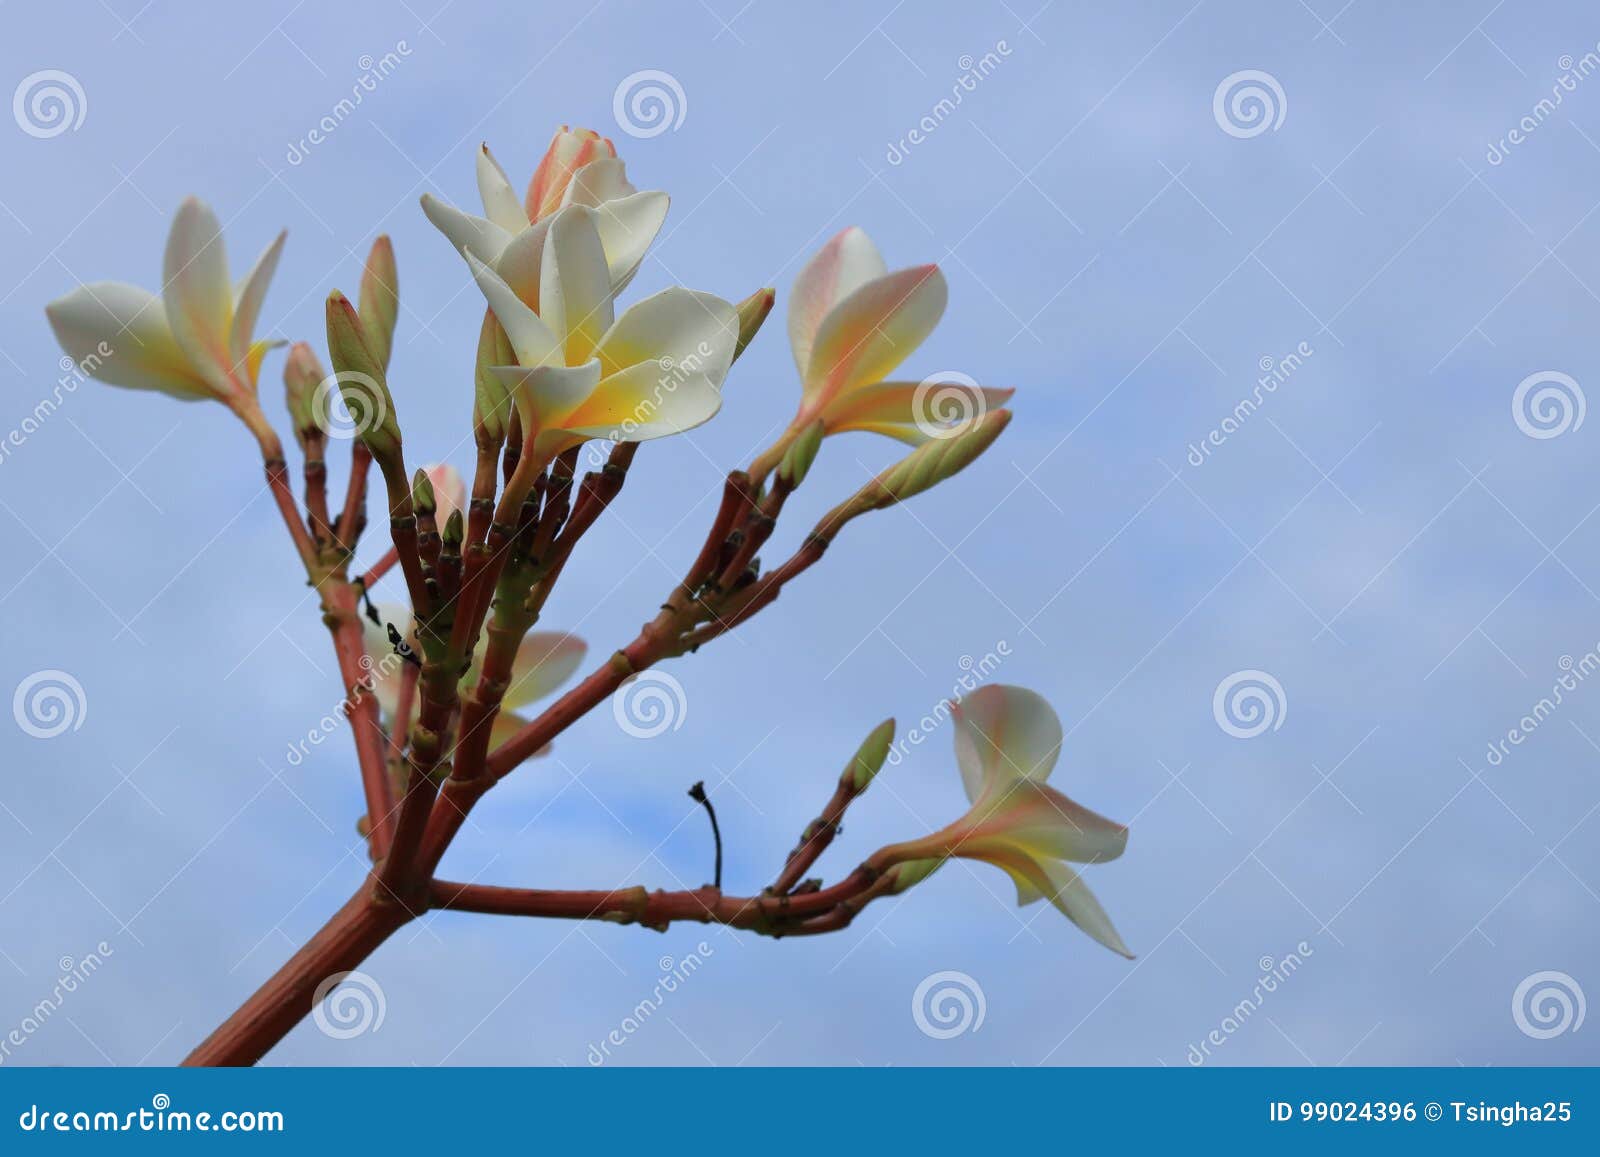 Plumeria Flowers on Blue Sky with Cloud Stock Photo - Image of ...